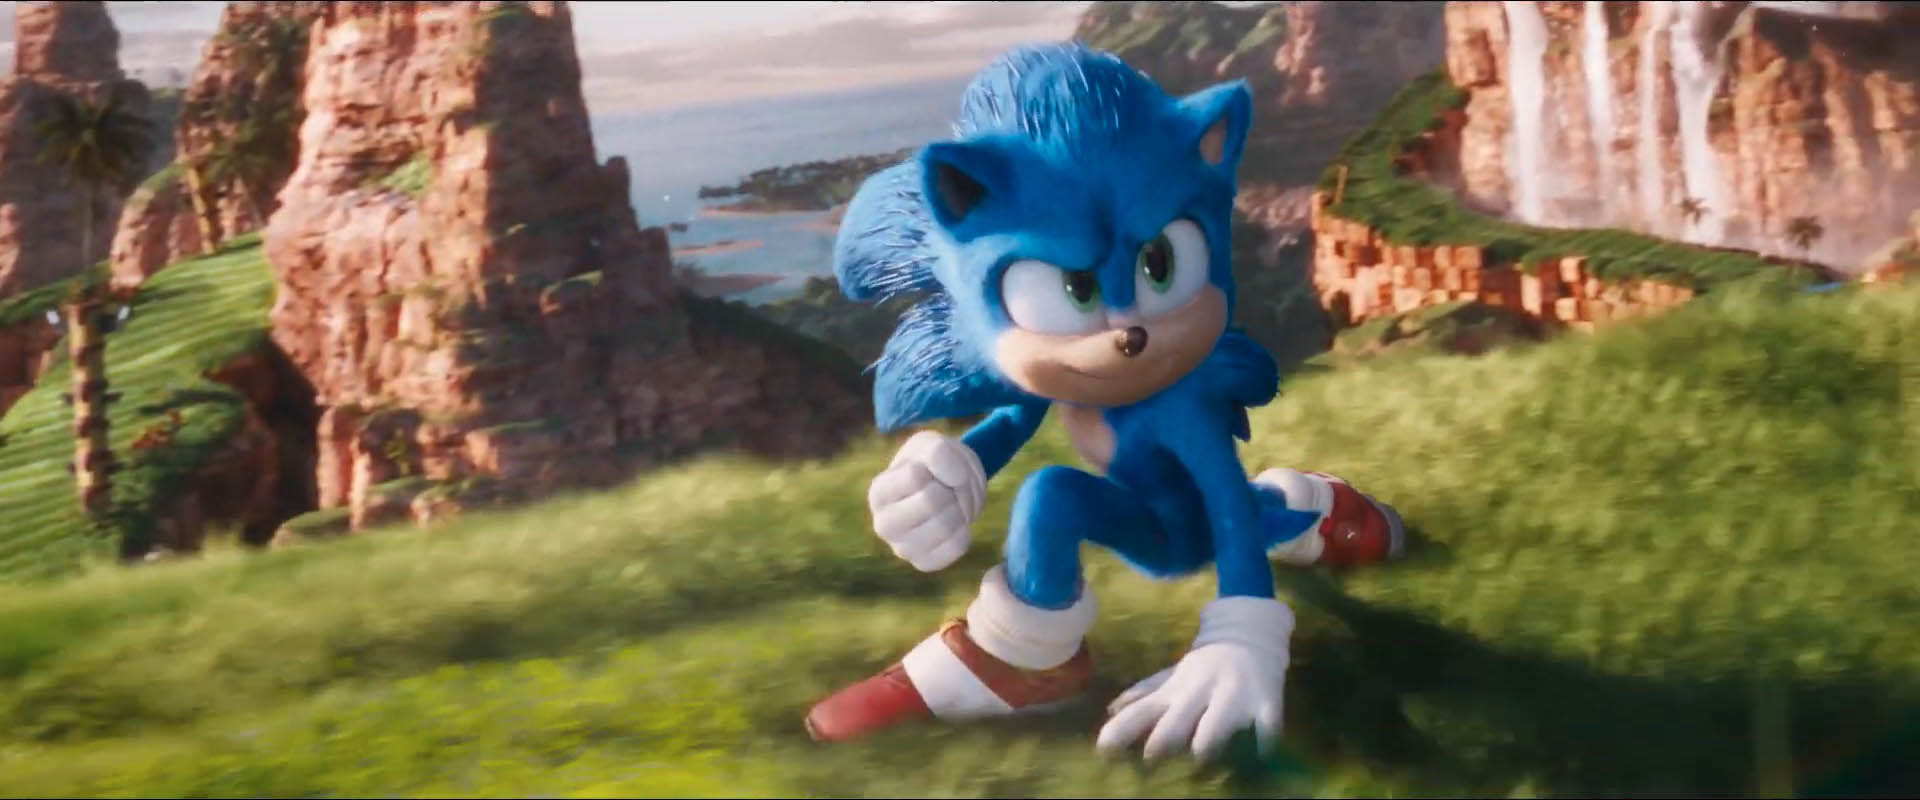 Sonic the Hedgehog trailer - Things look so much better | The Nerdy